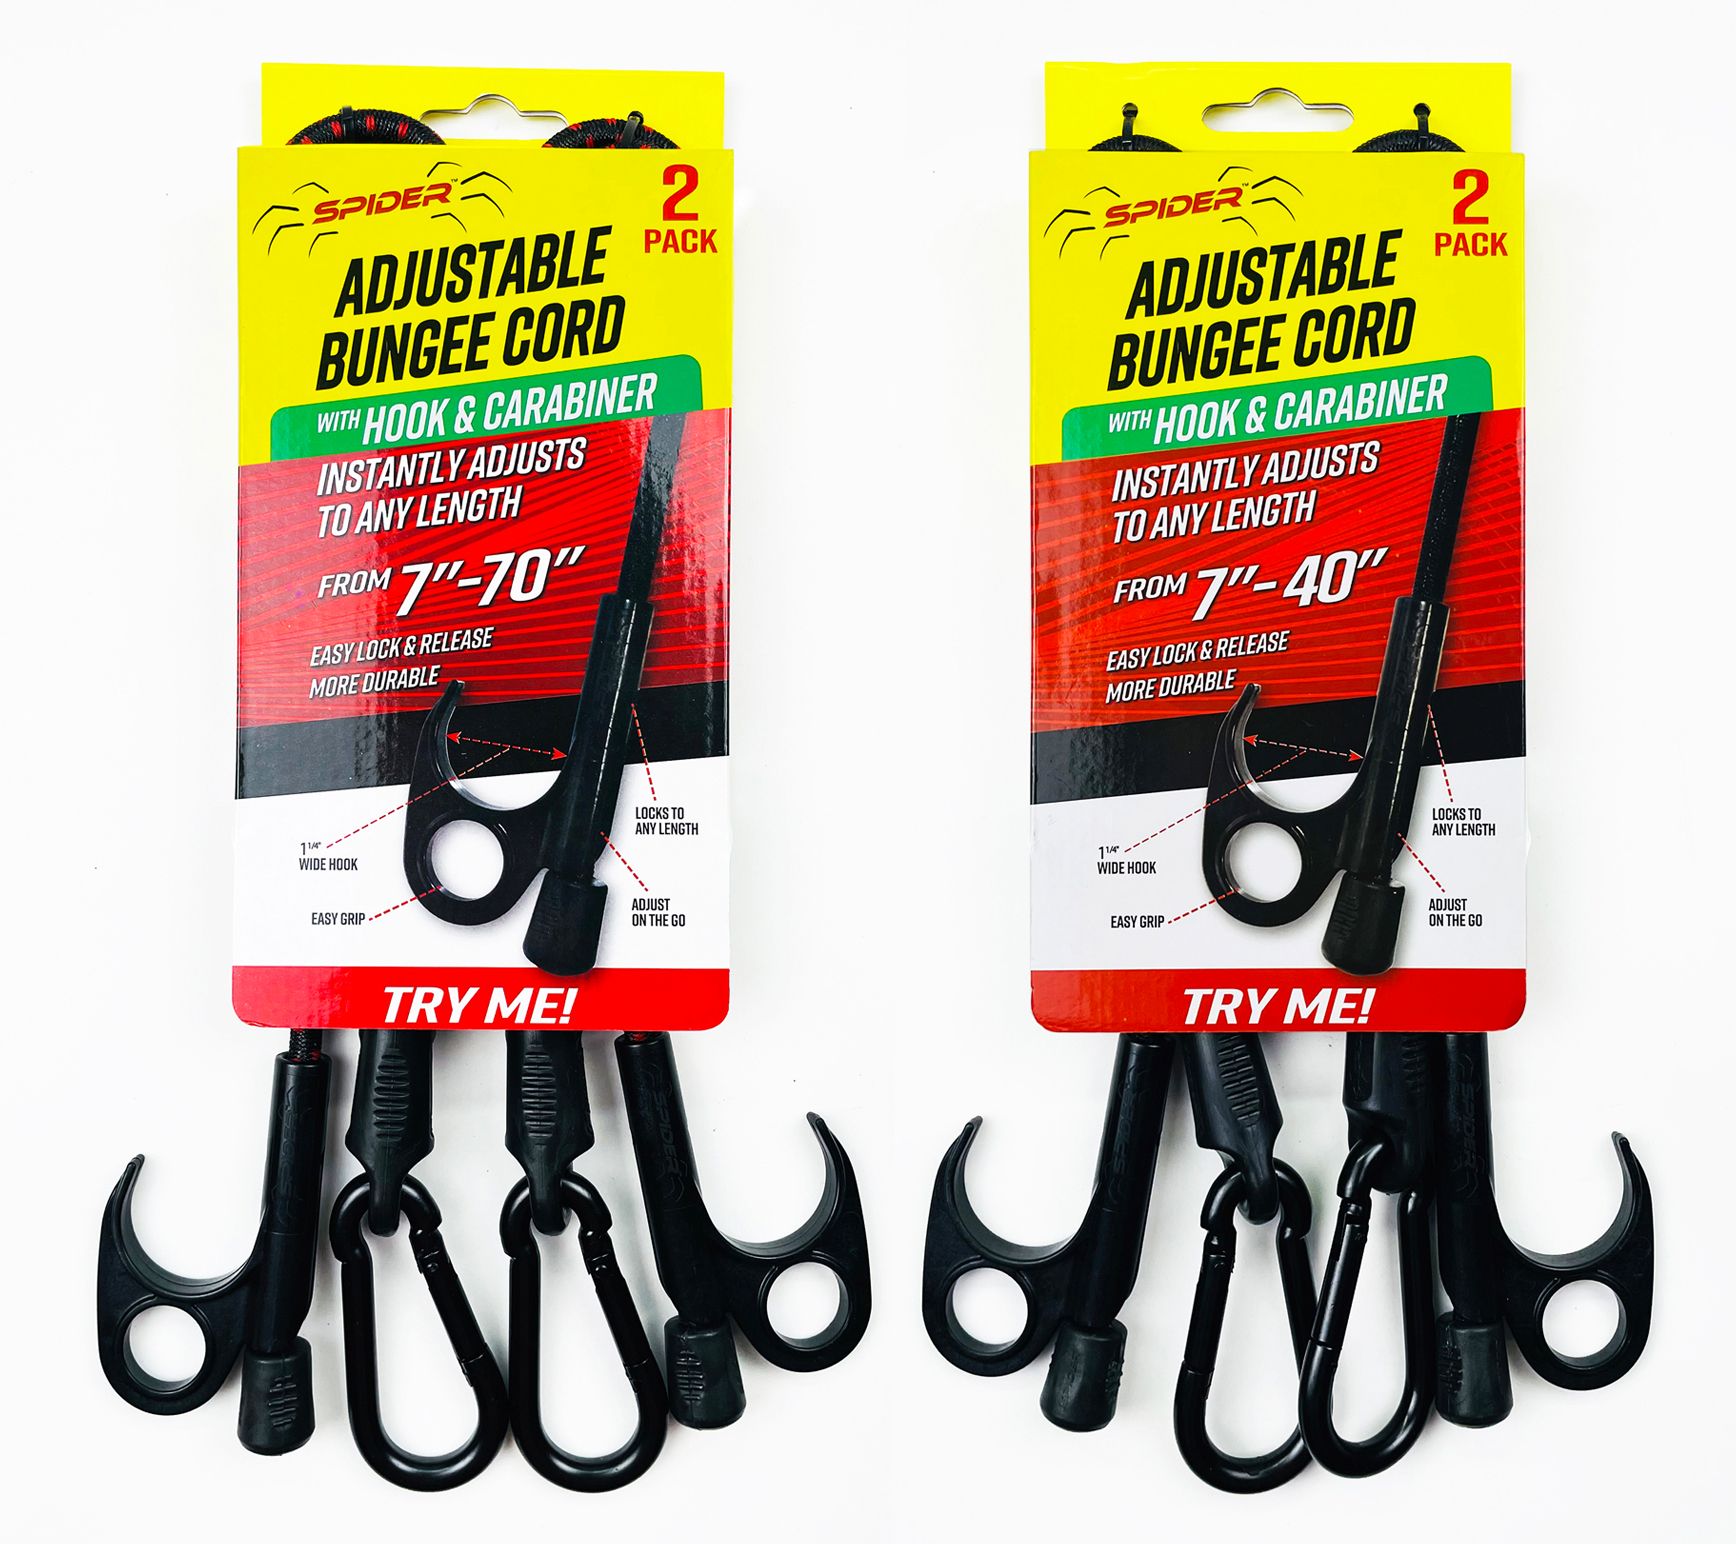 Spider Cord 4-pk Adjustable Bungee Cords with Hook and Carabiner